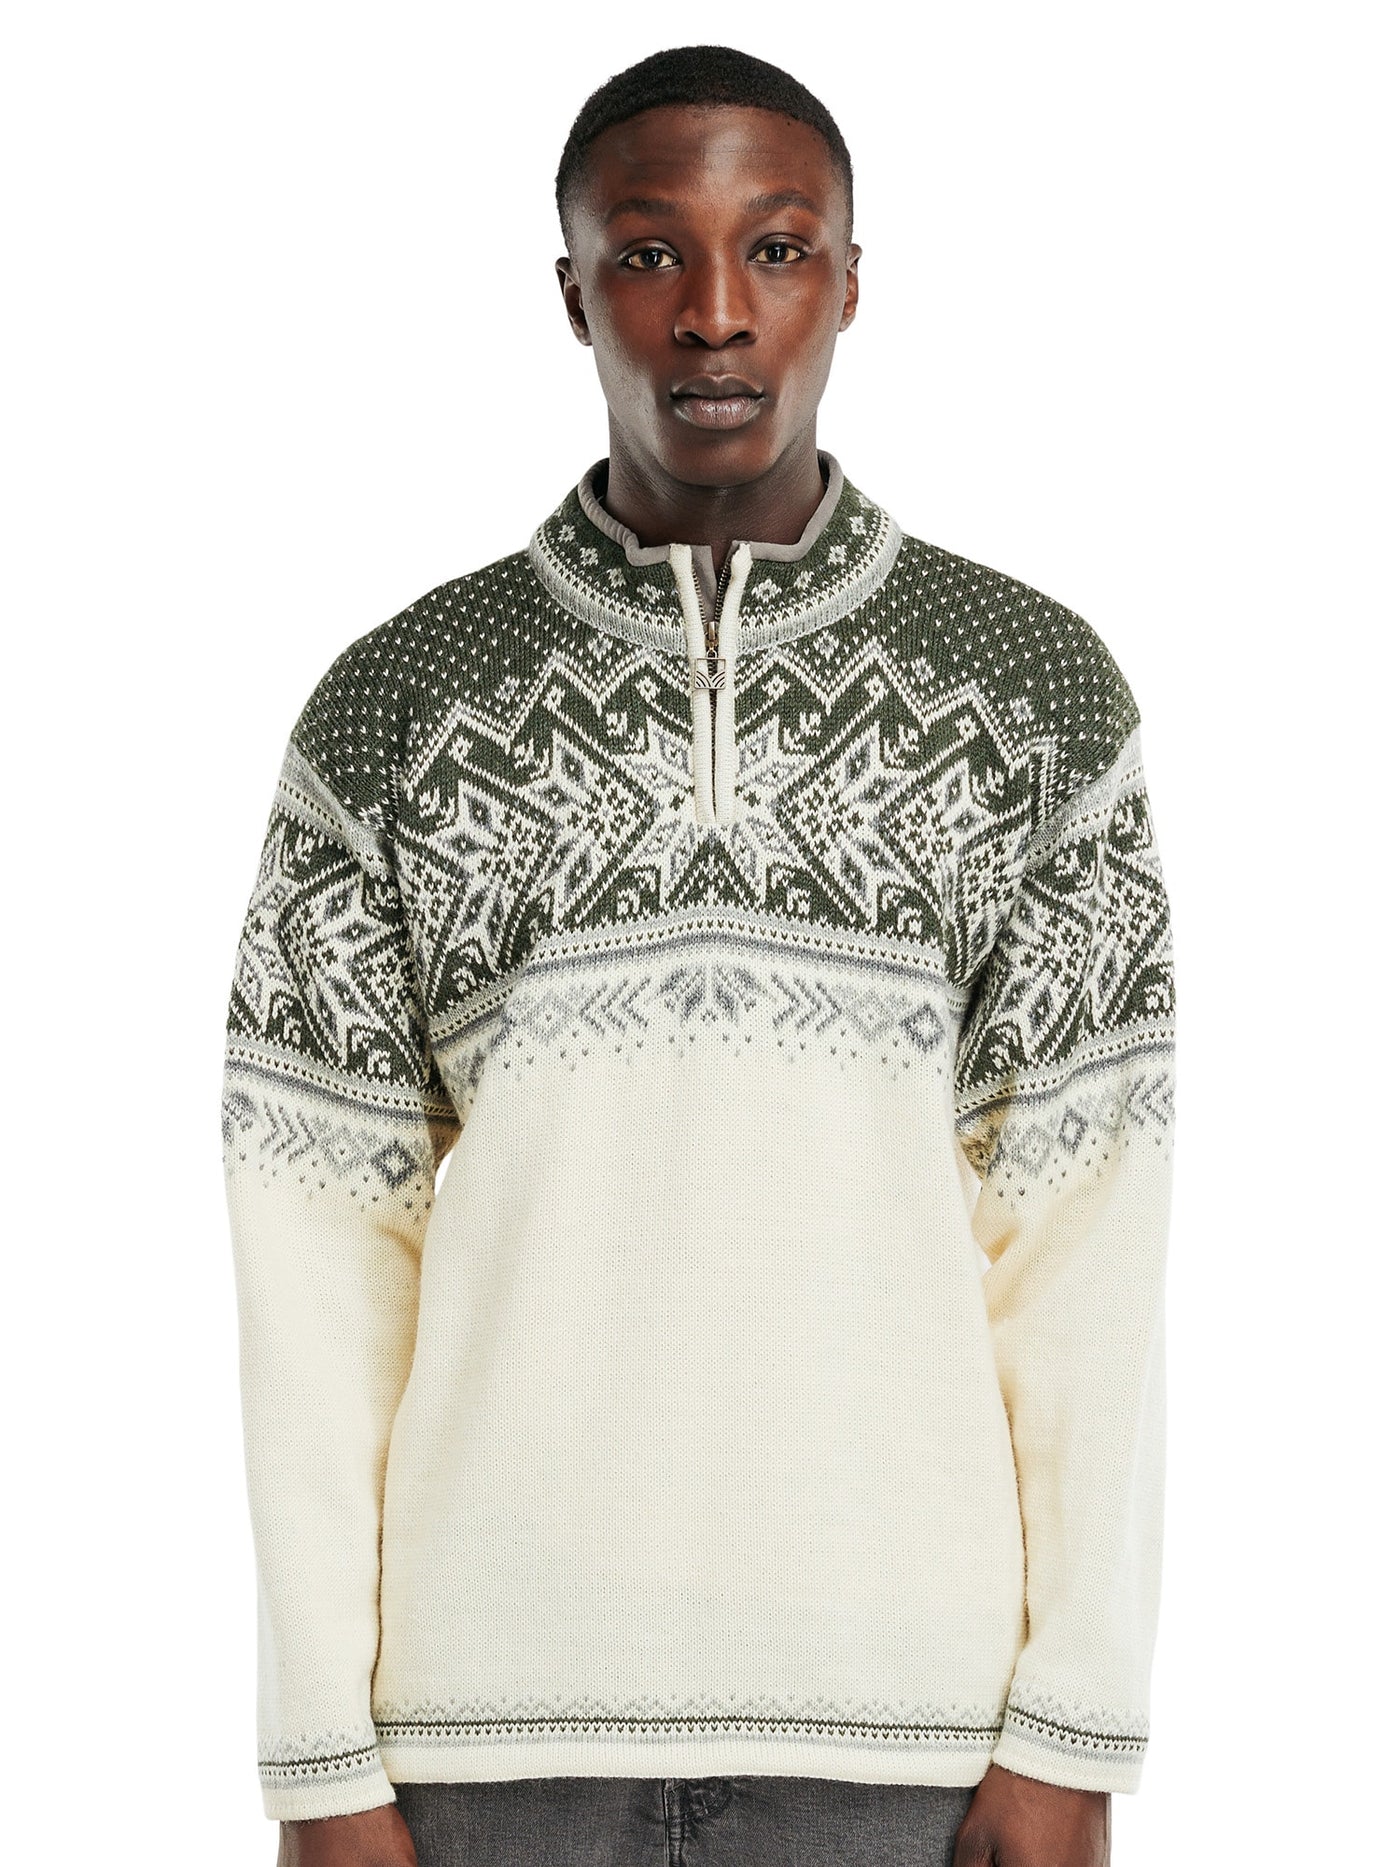 Vail sweater